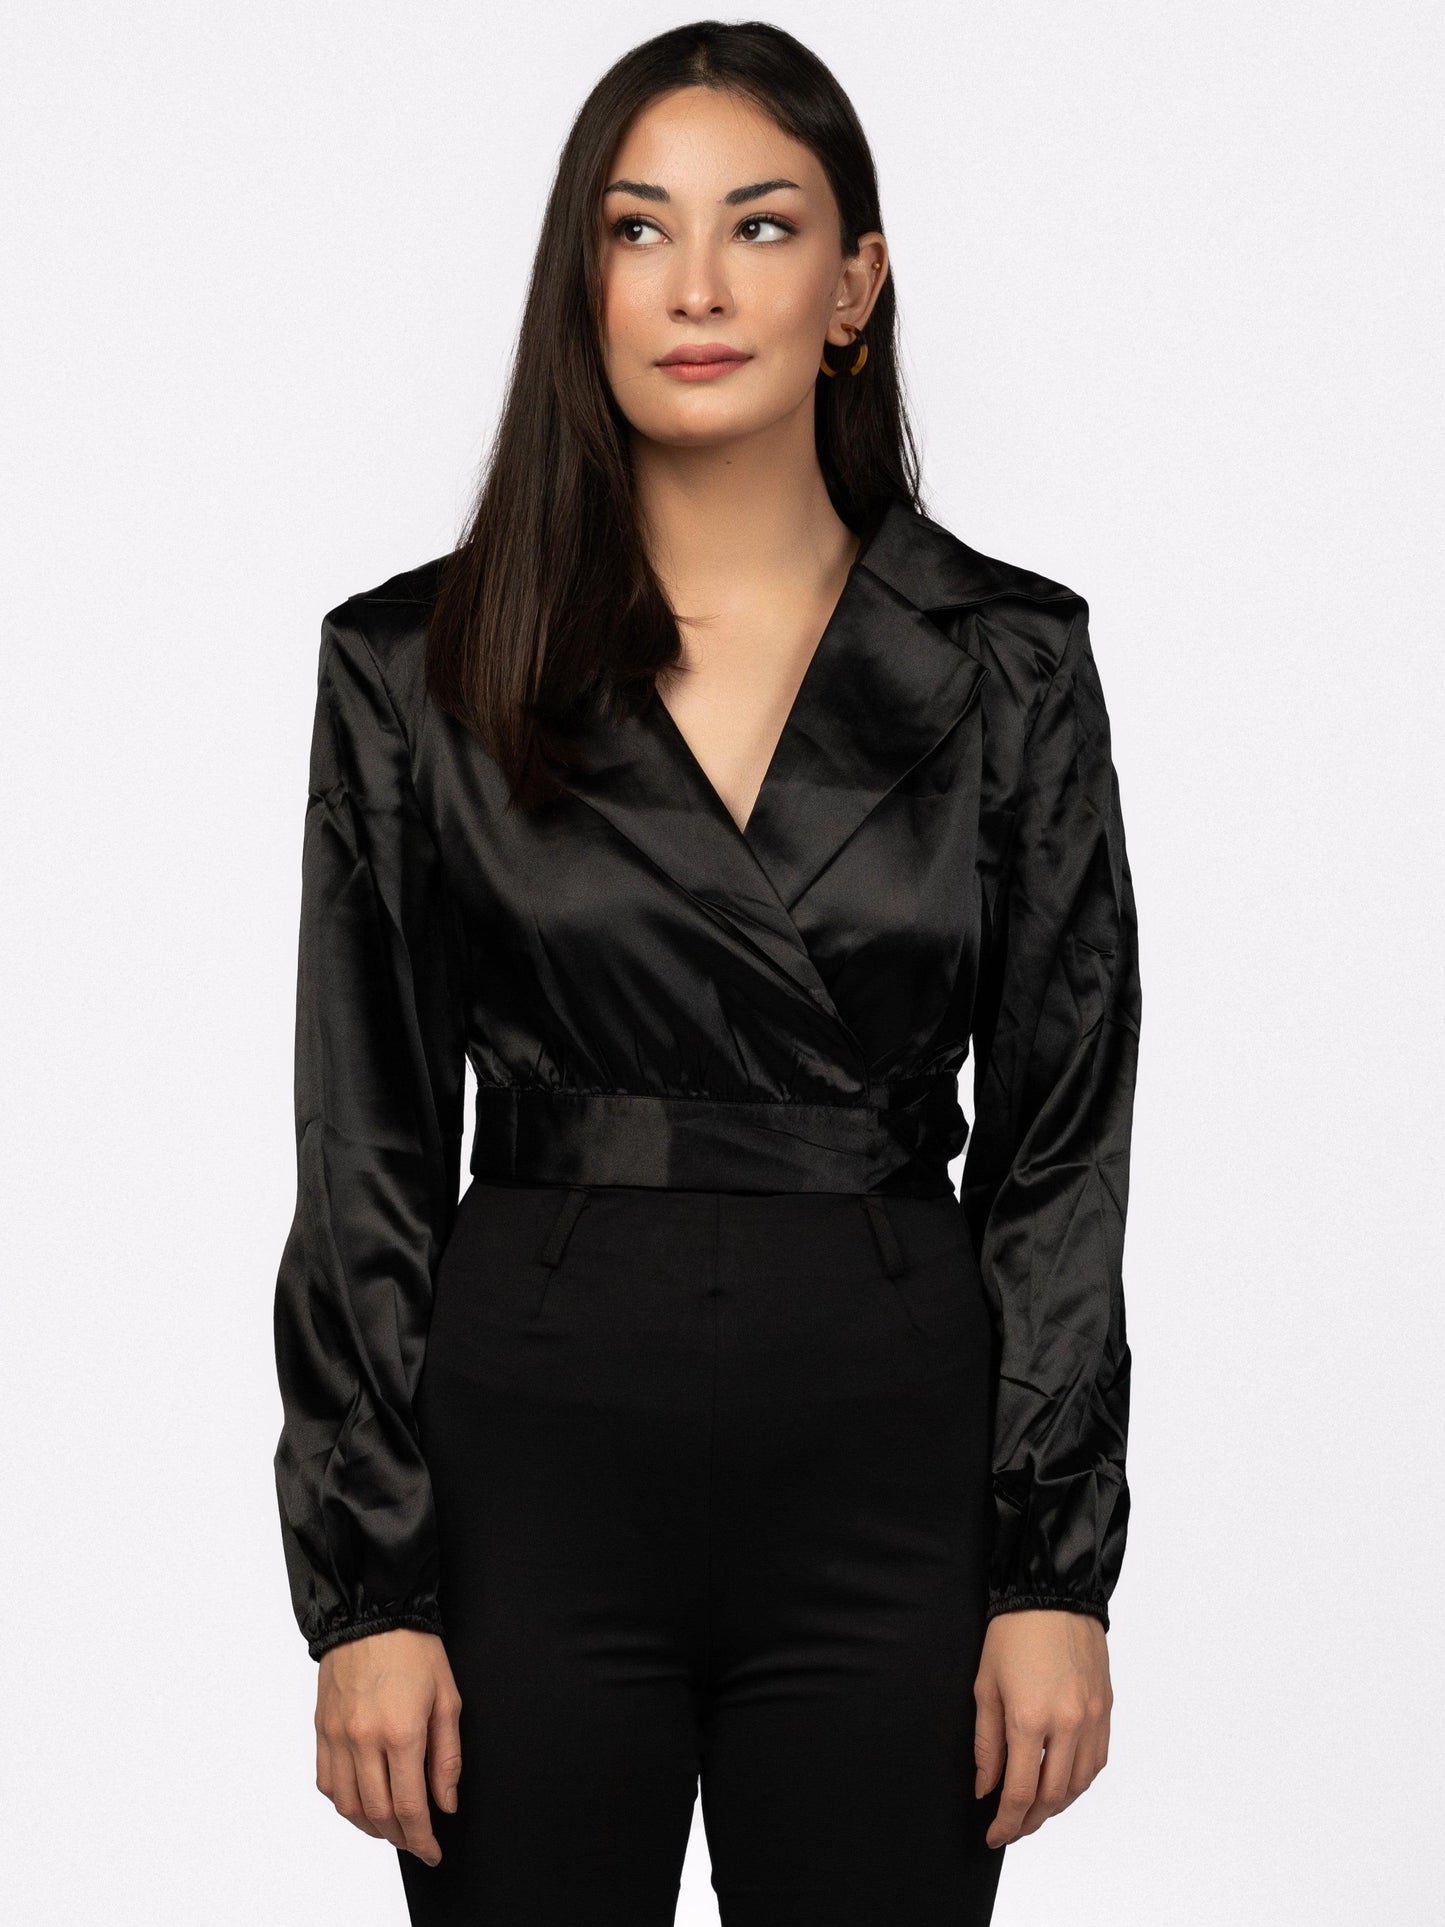 Waist-Fitted Lapel Style Shirt Ramay